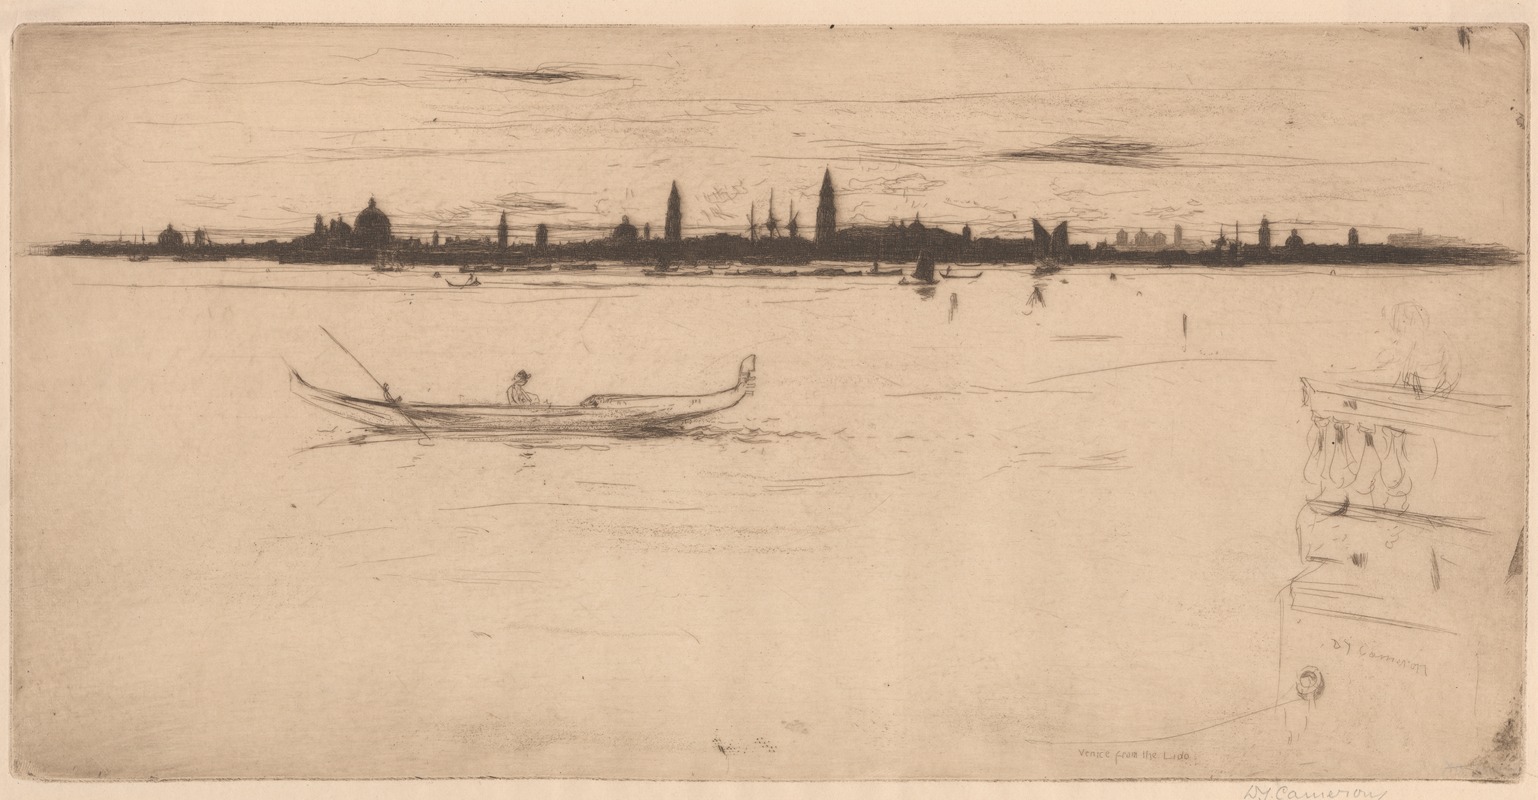 David Young Cameron - Venice from the Lido